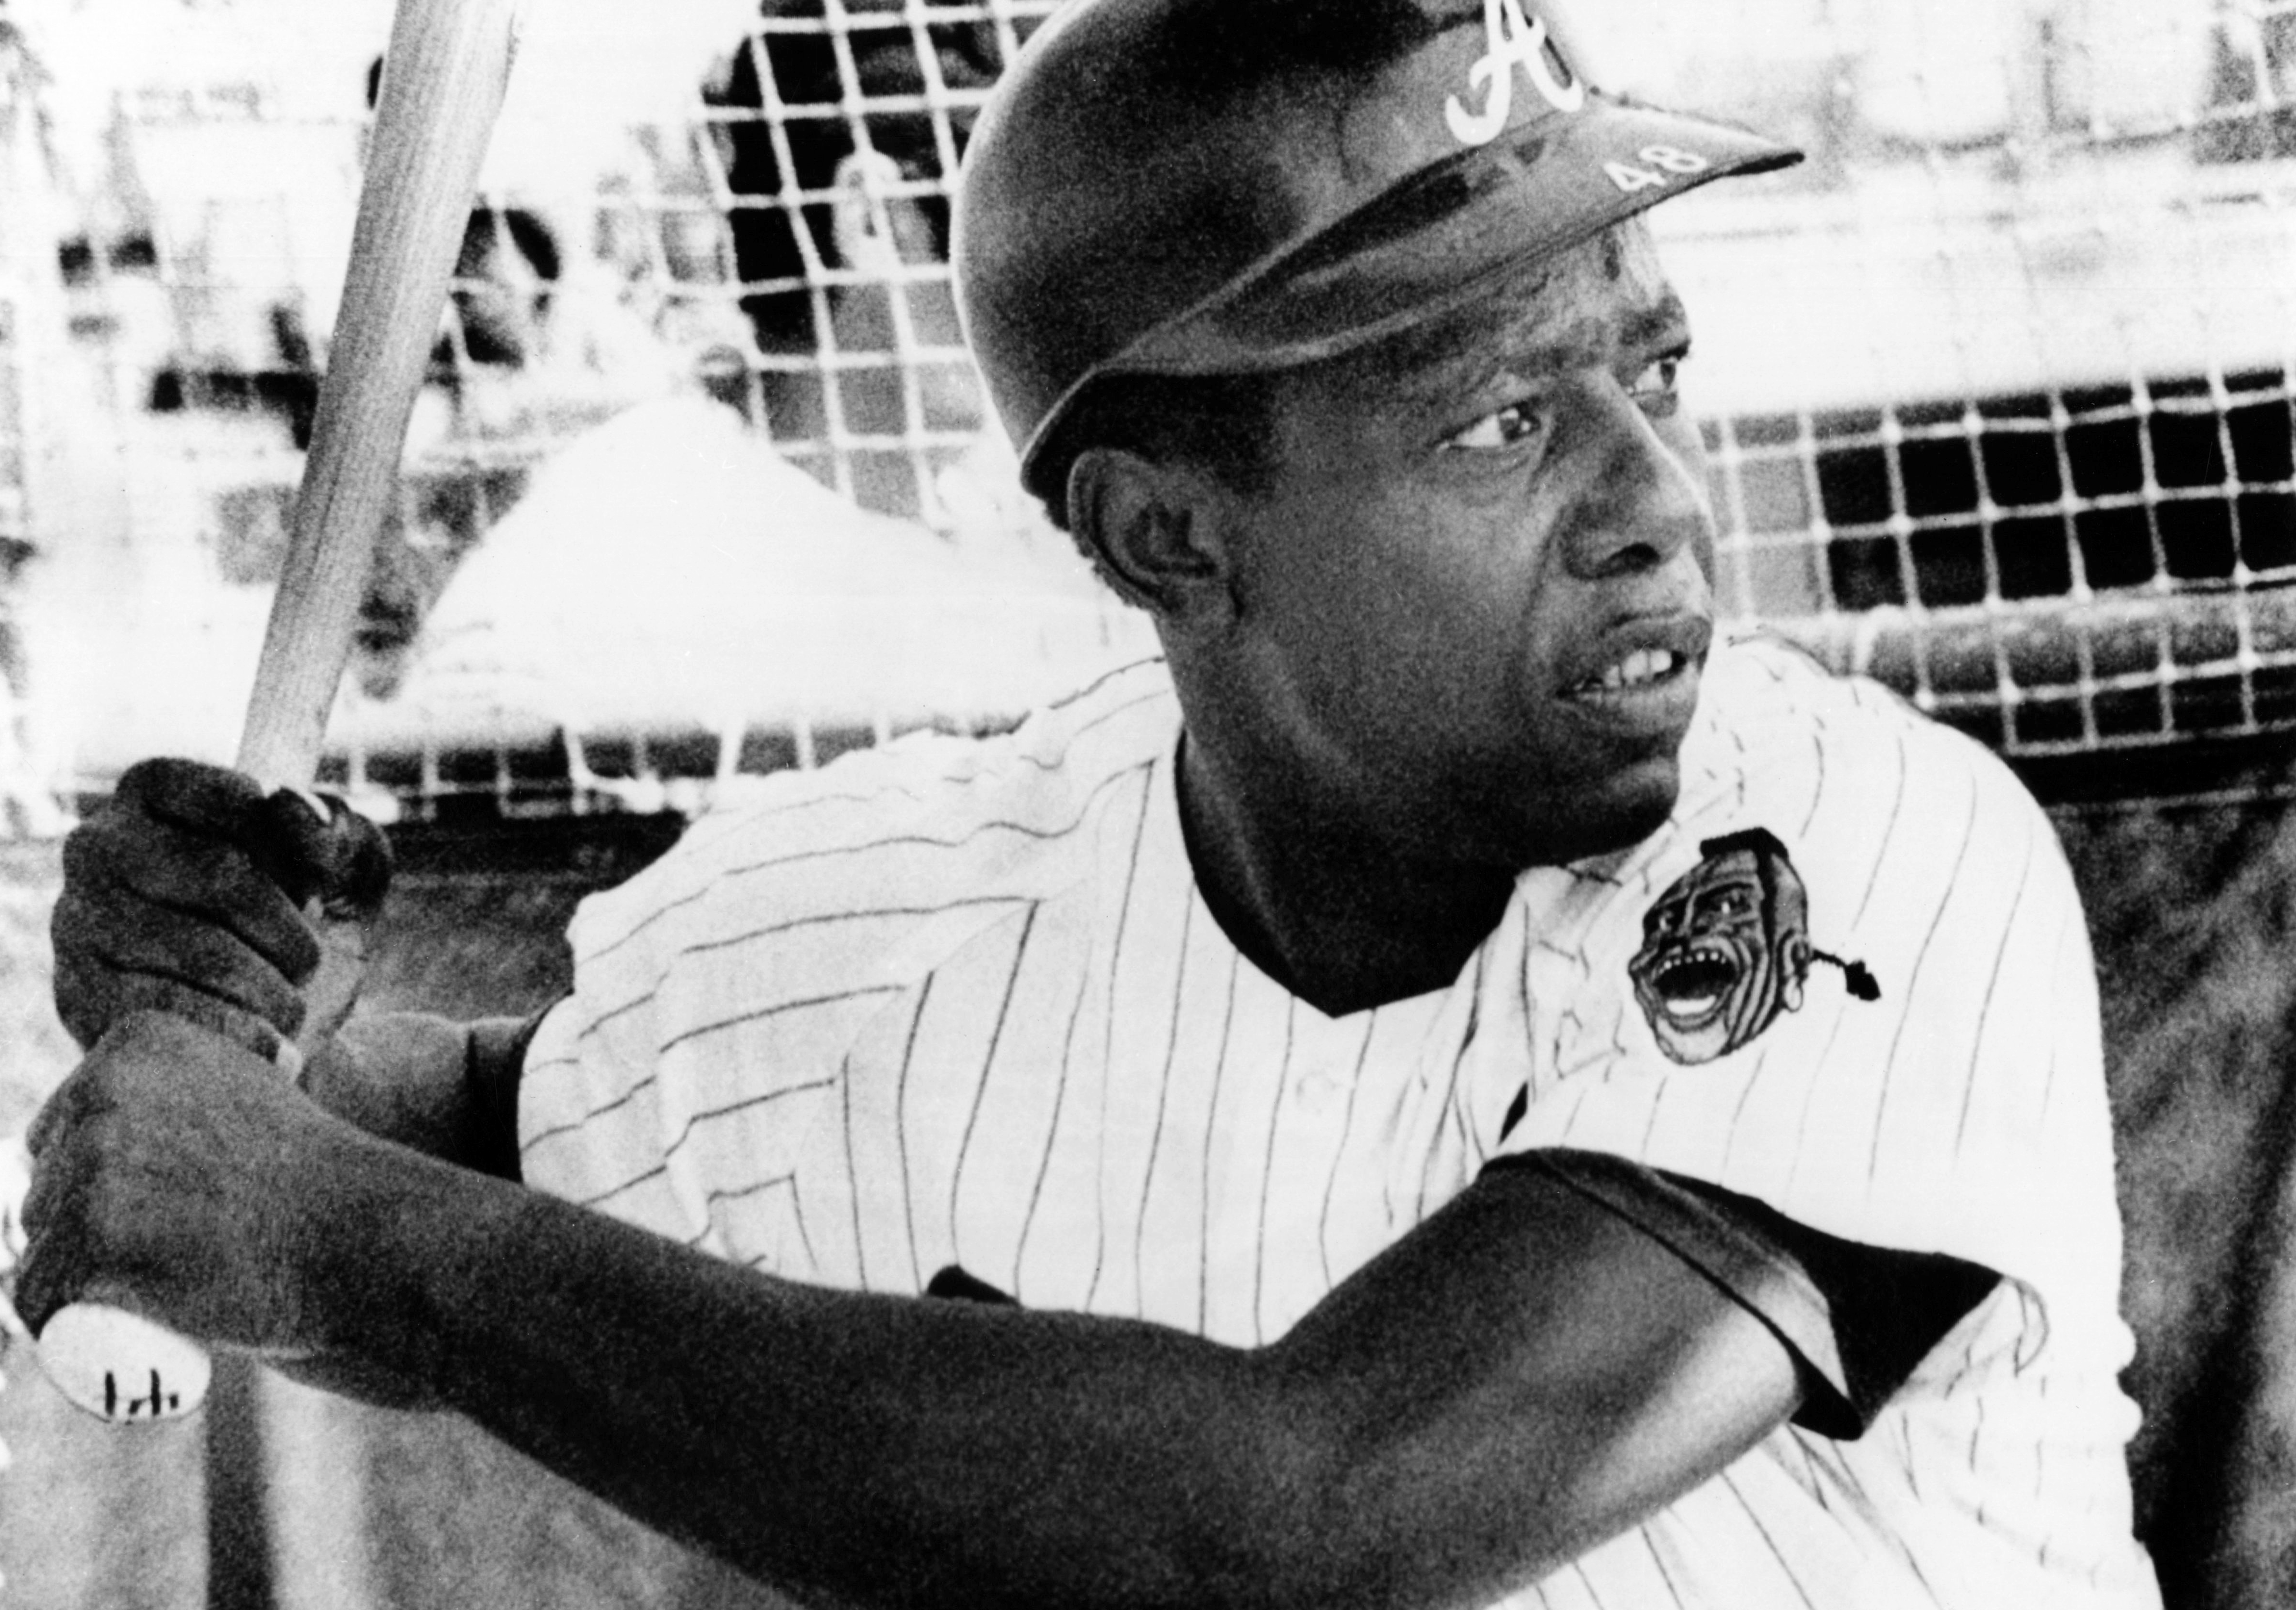 Baseball legend Hank Aaron has died at age 86, reports say